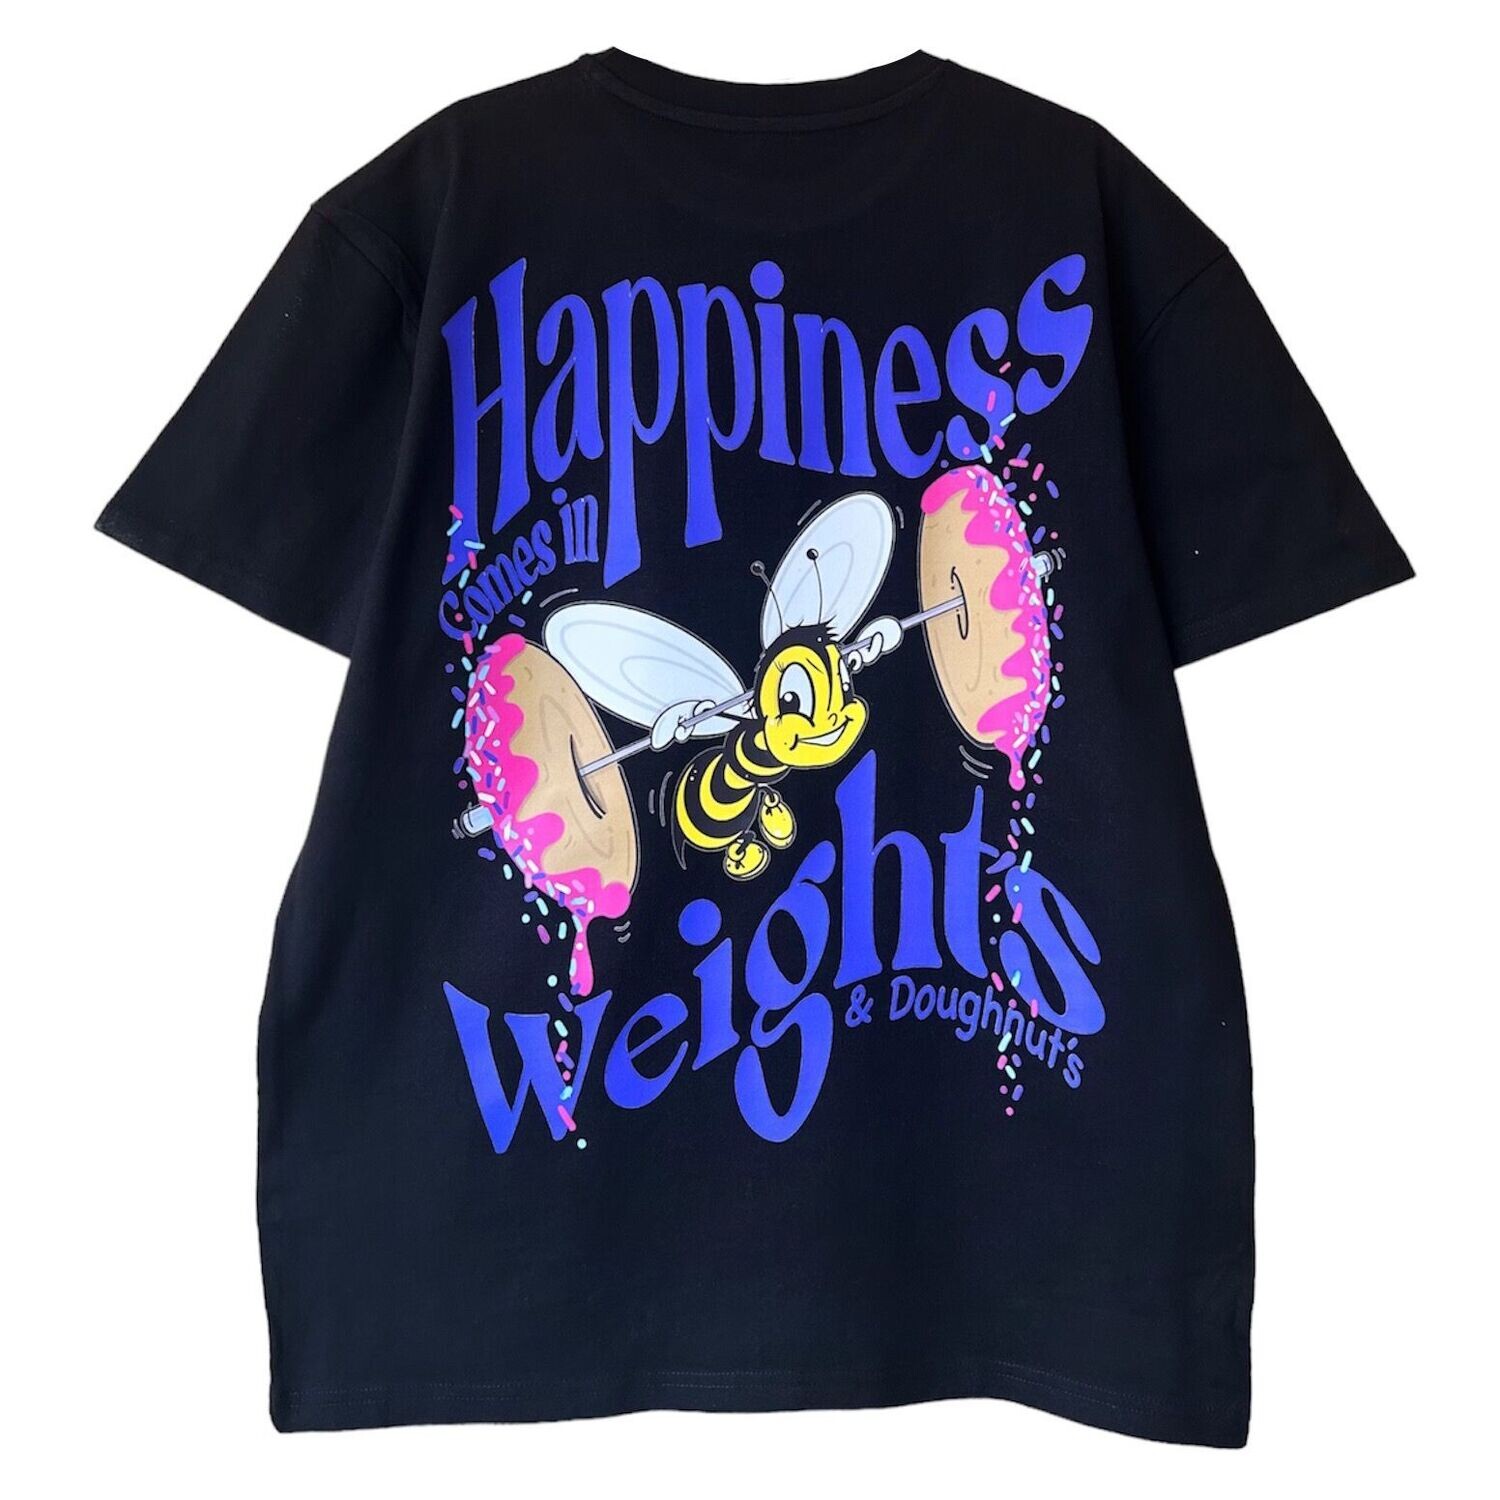 HAPPINESS TriBLEND Tee